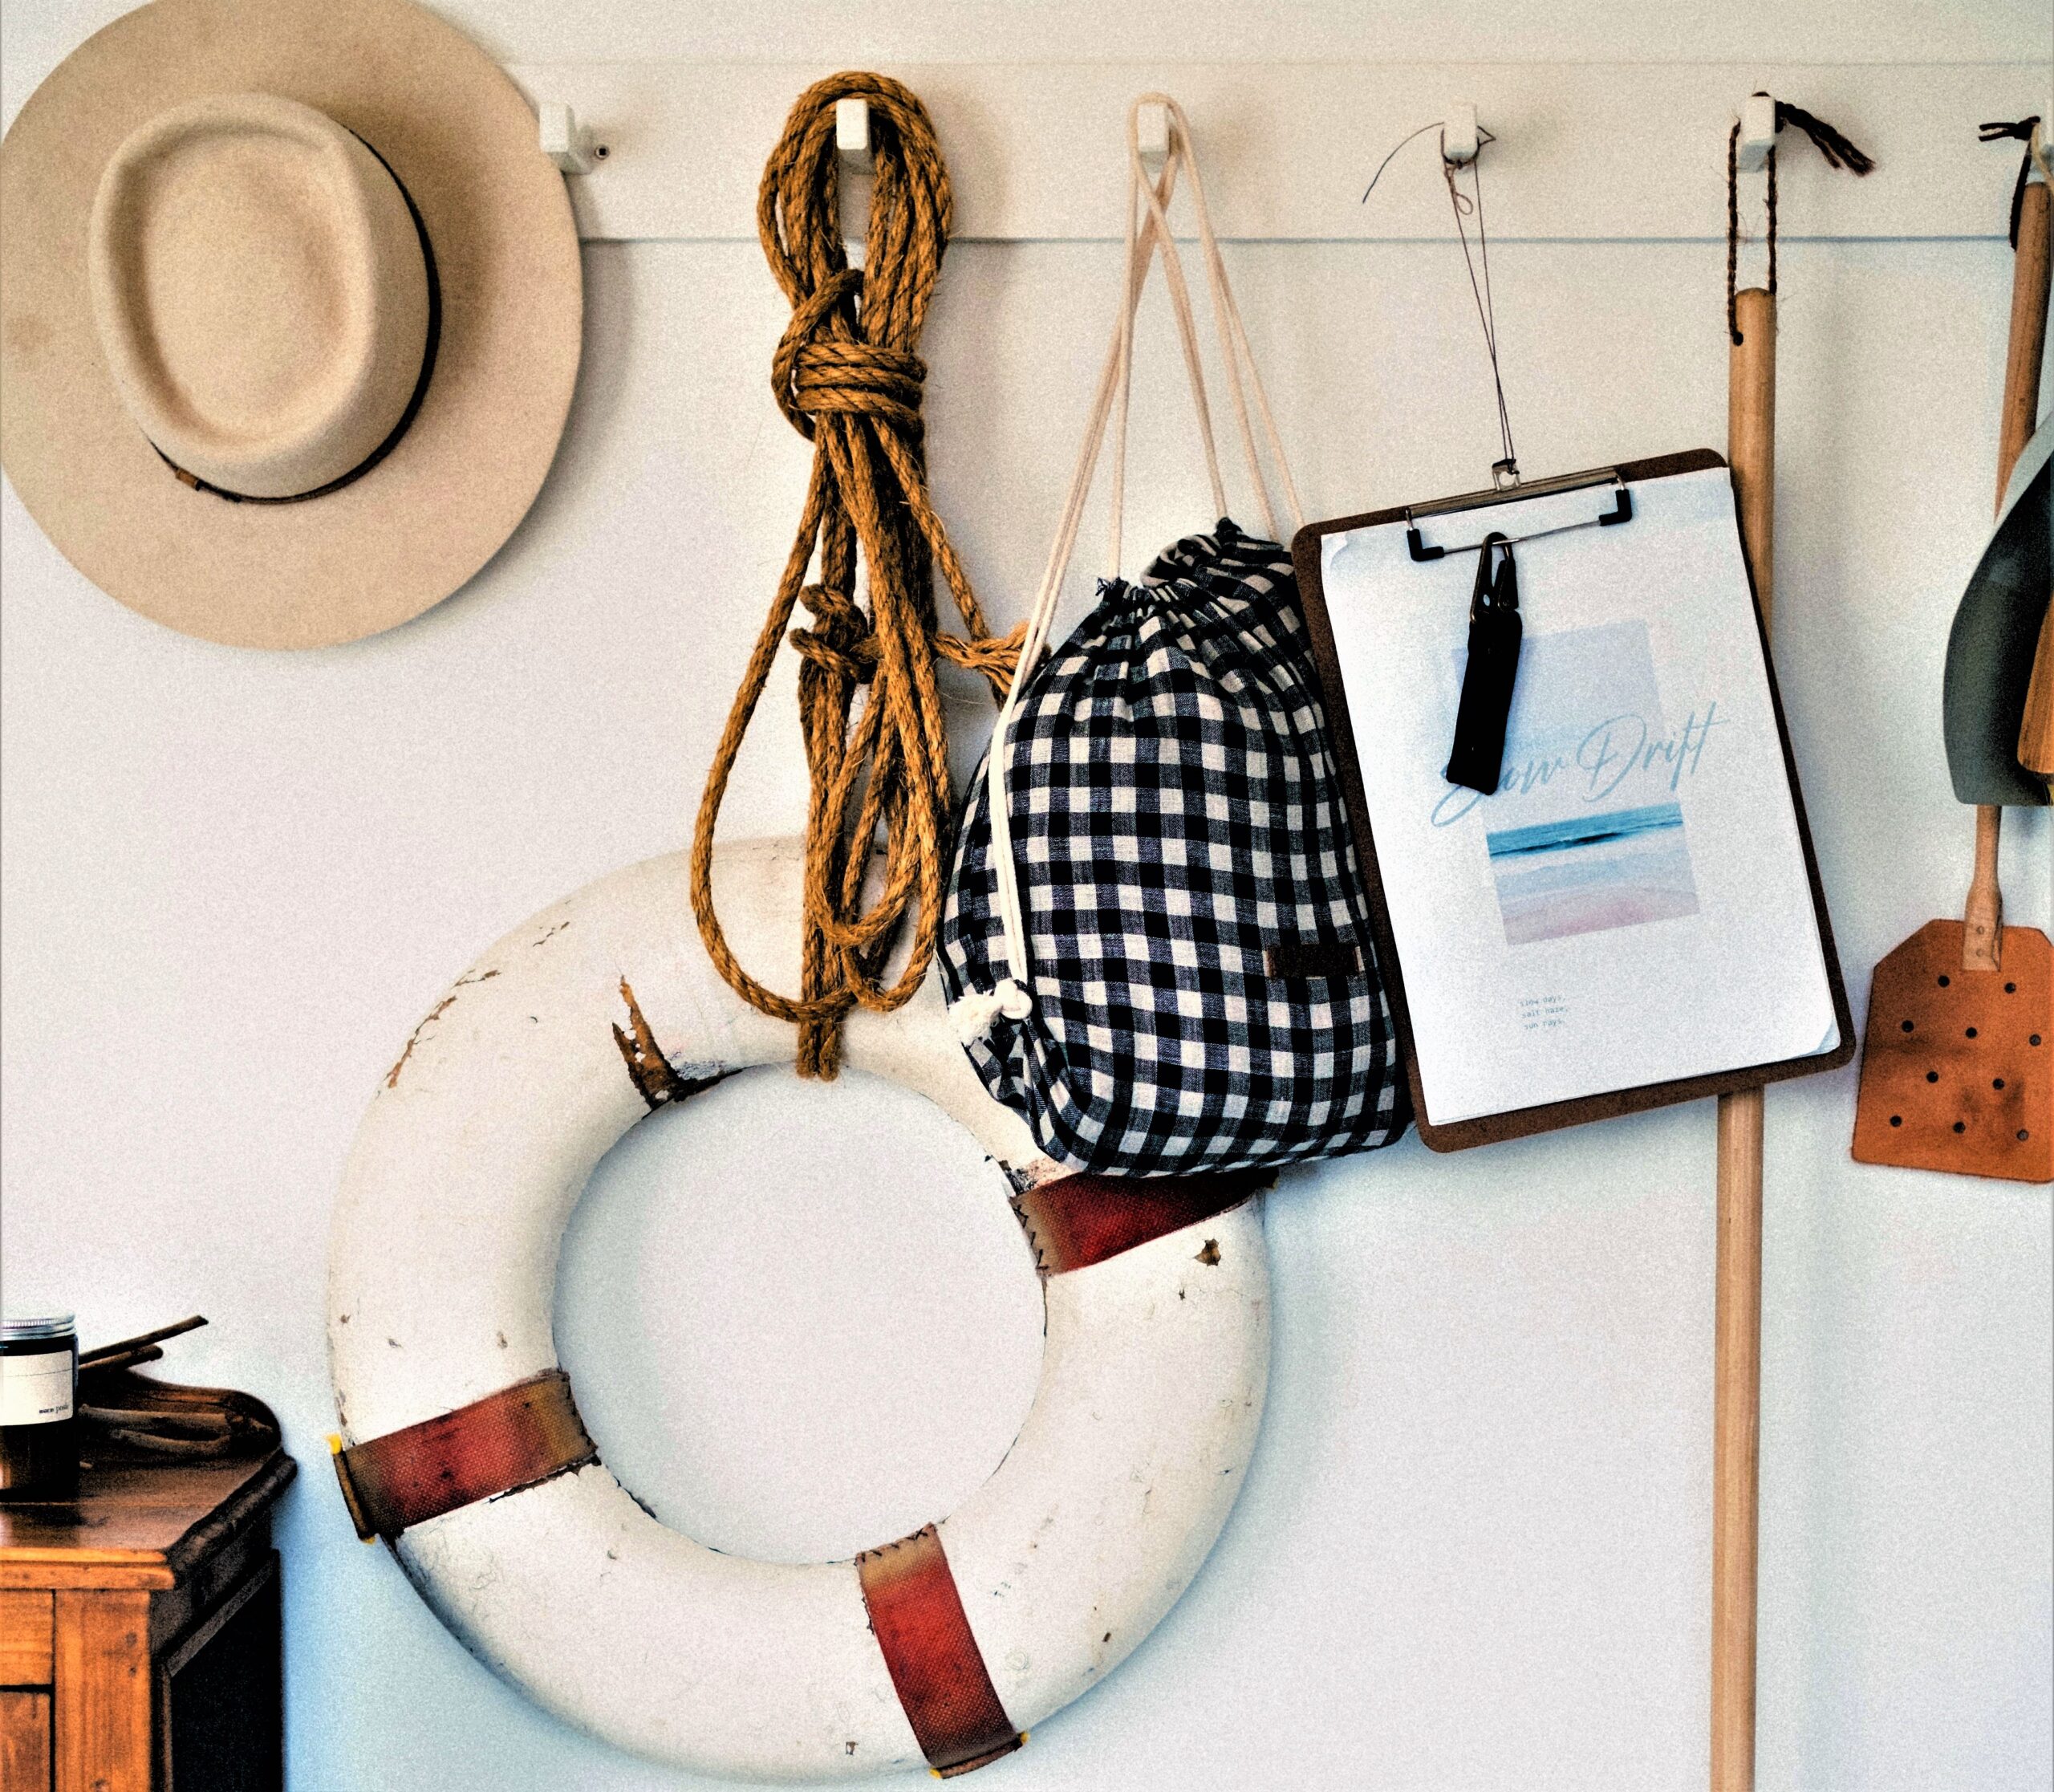 On a shiplap wall all painted in white, a series of hooks welcome various vintage accessories with a nautical theme.